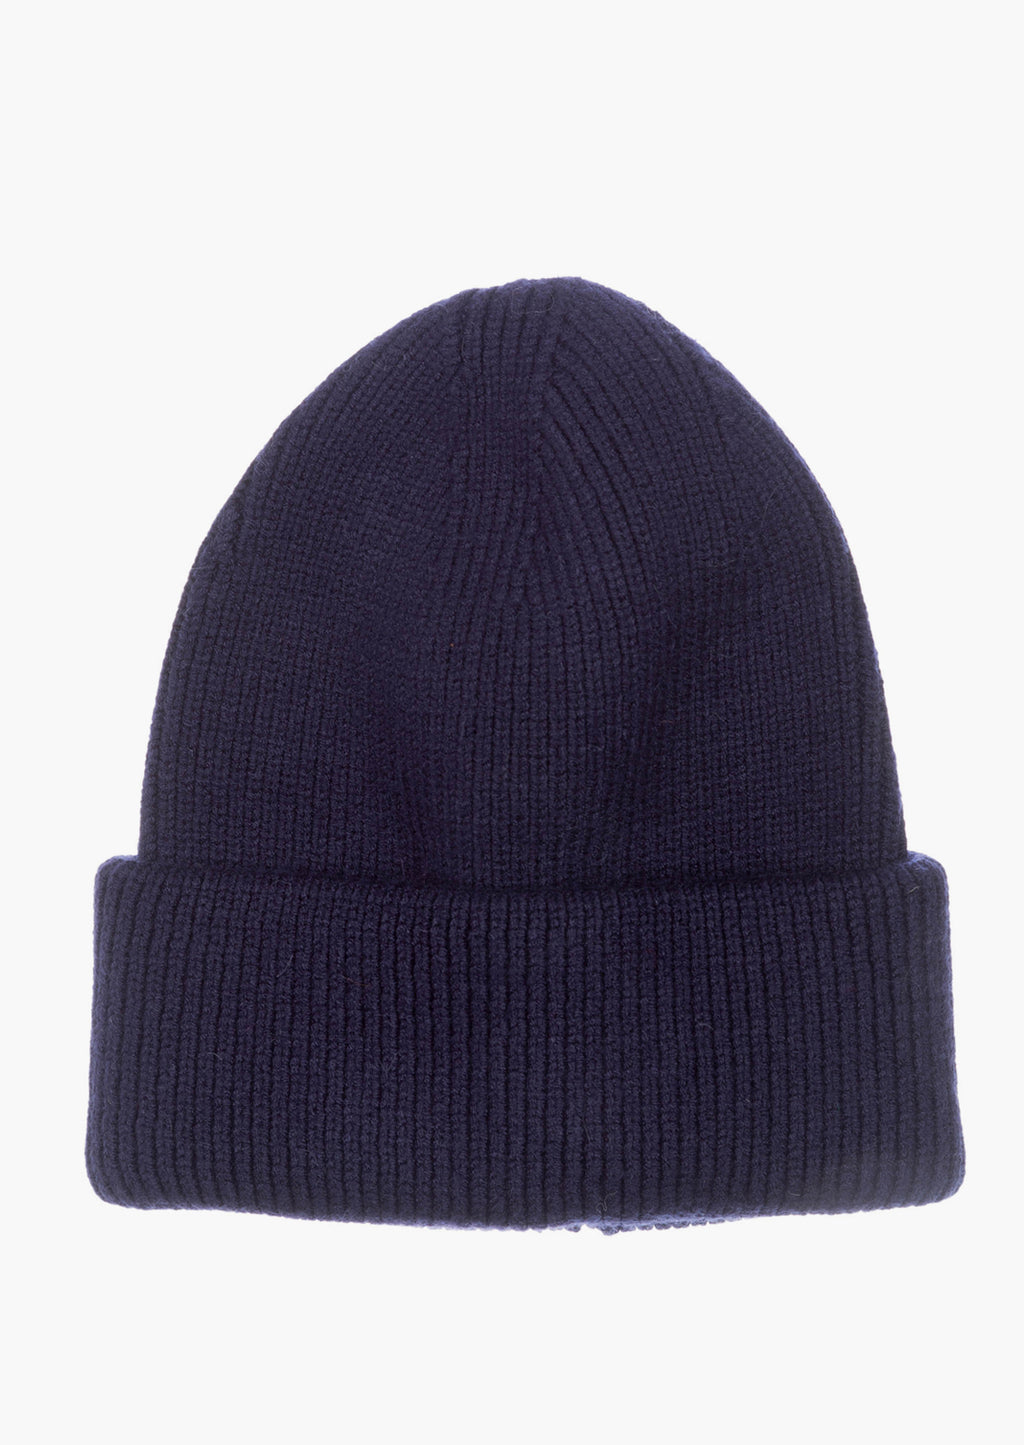 Navy: A knit beanie with oversized cuff in navy color.